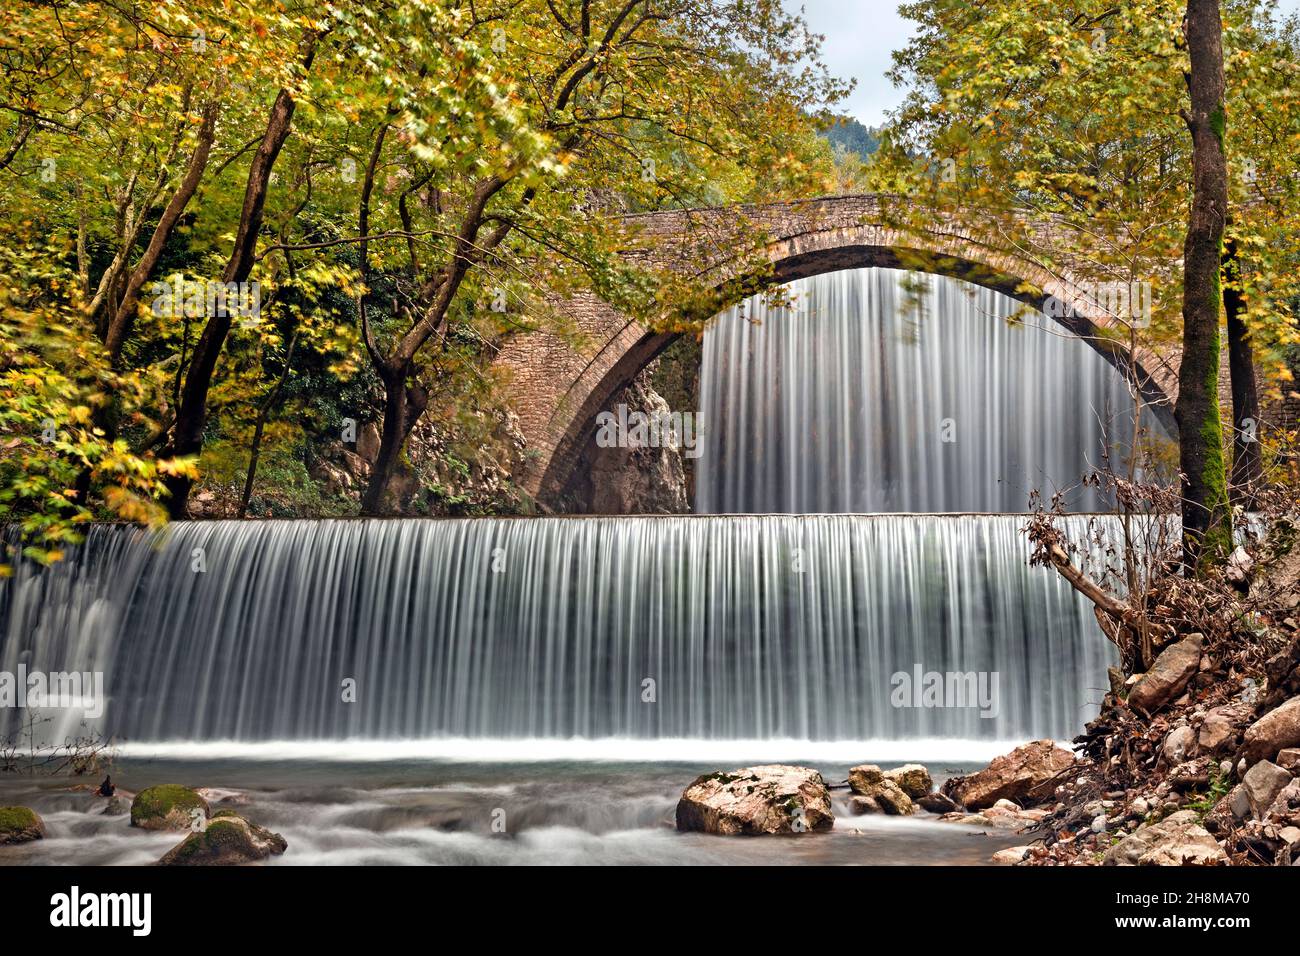 The old stone, arched bridge, between two waterfalls in Palaiokaria, Trikala prefecture, Thessaly, Greece. Stock Photo